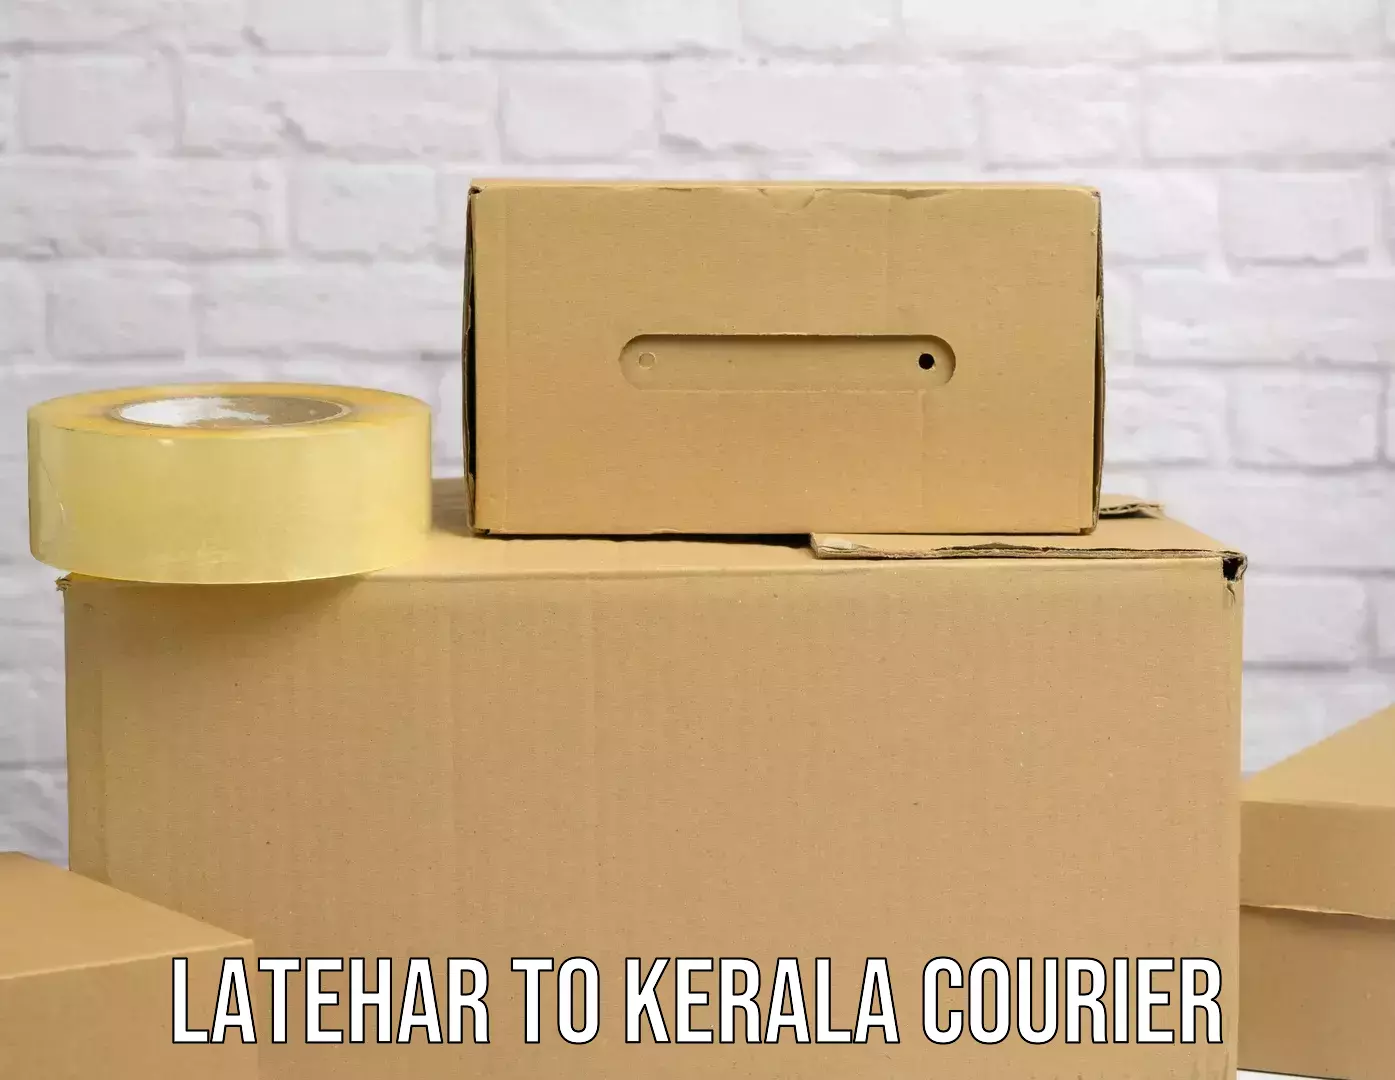 Fast-track shipping solutions Latehar to Mahe